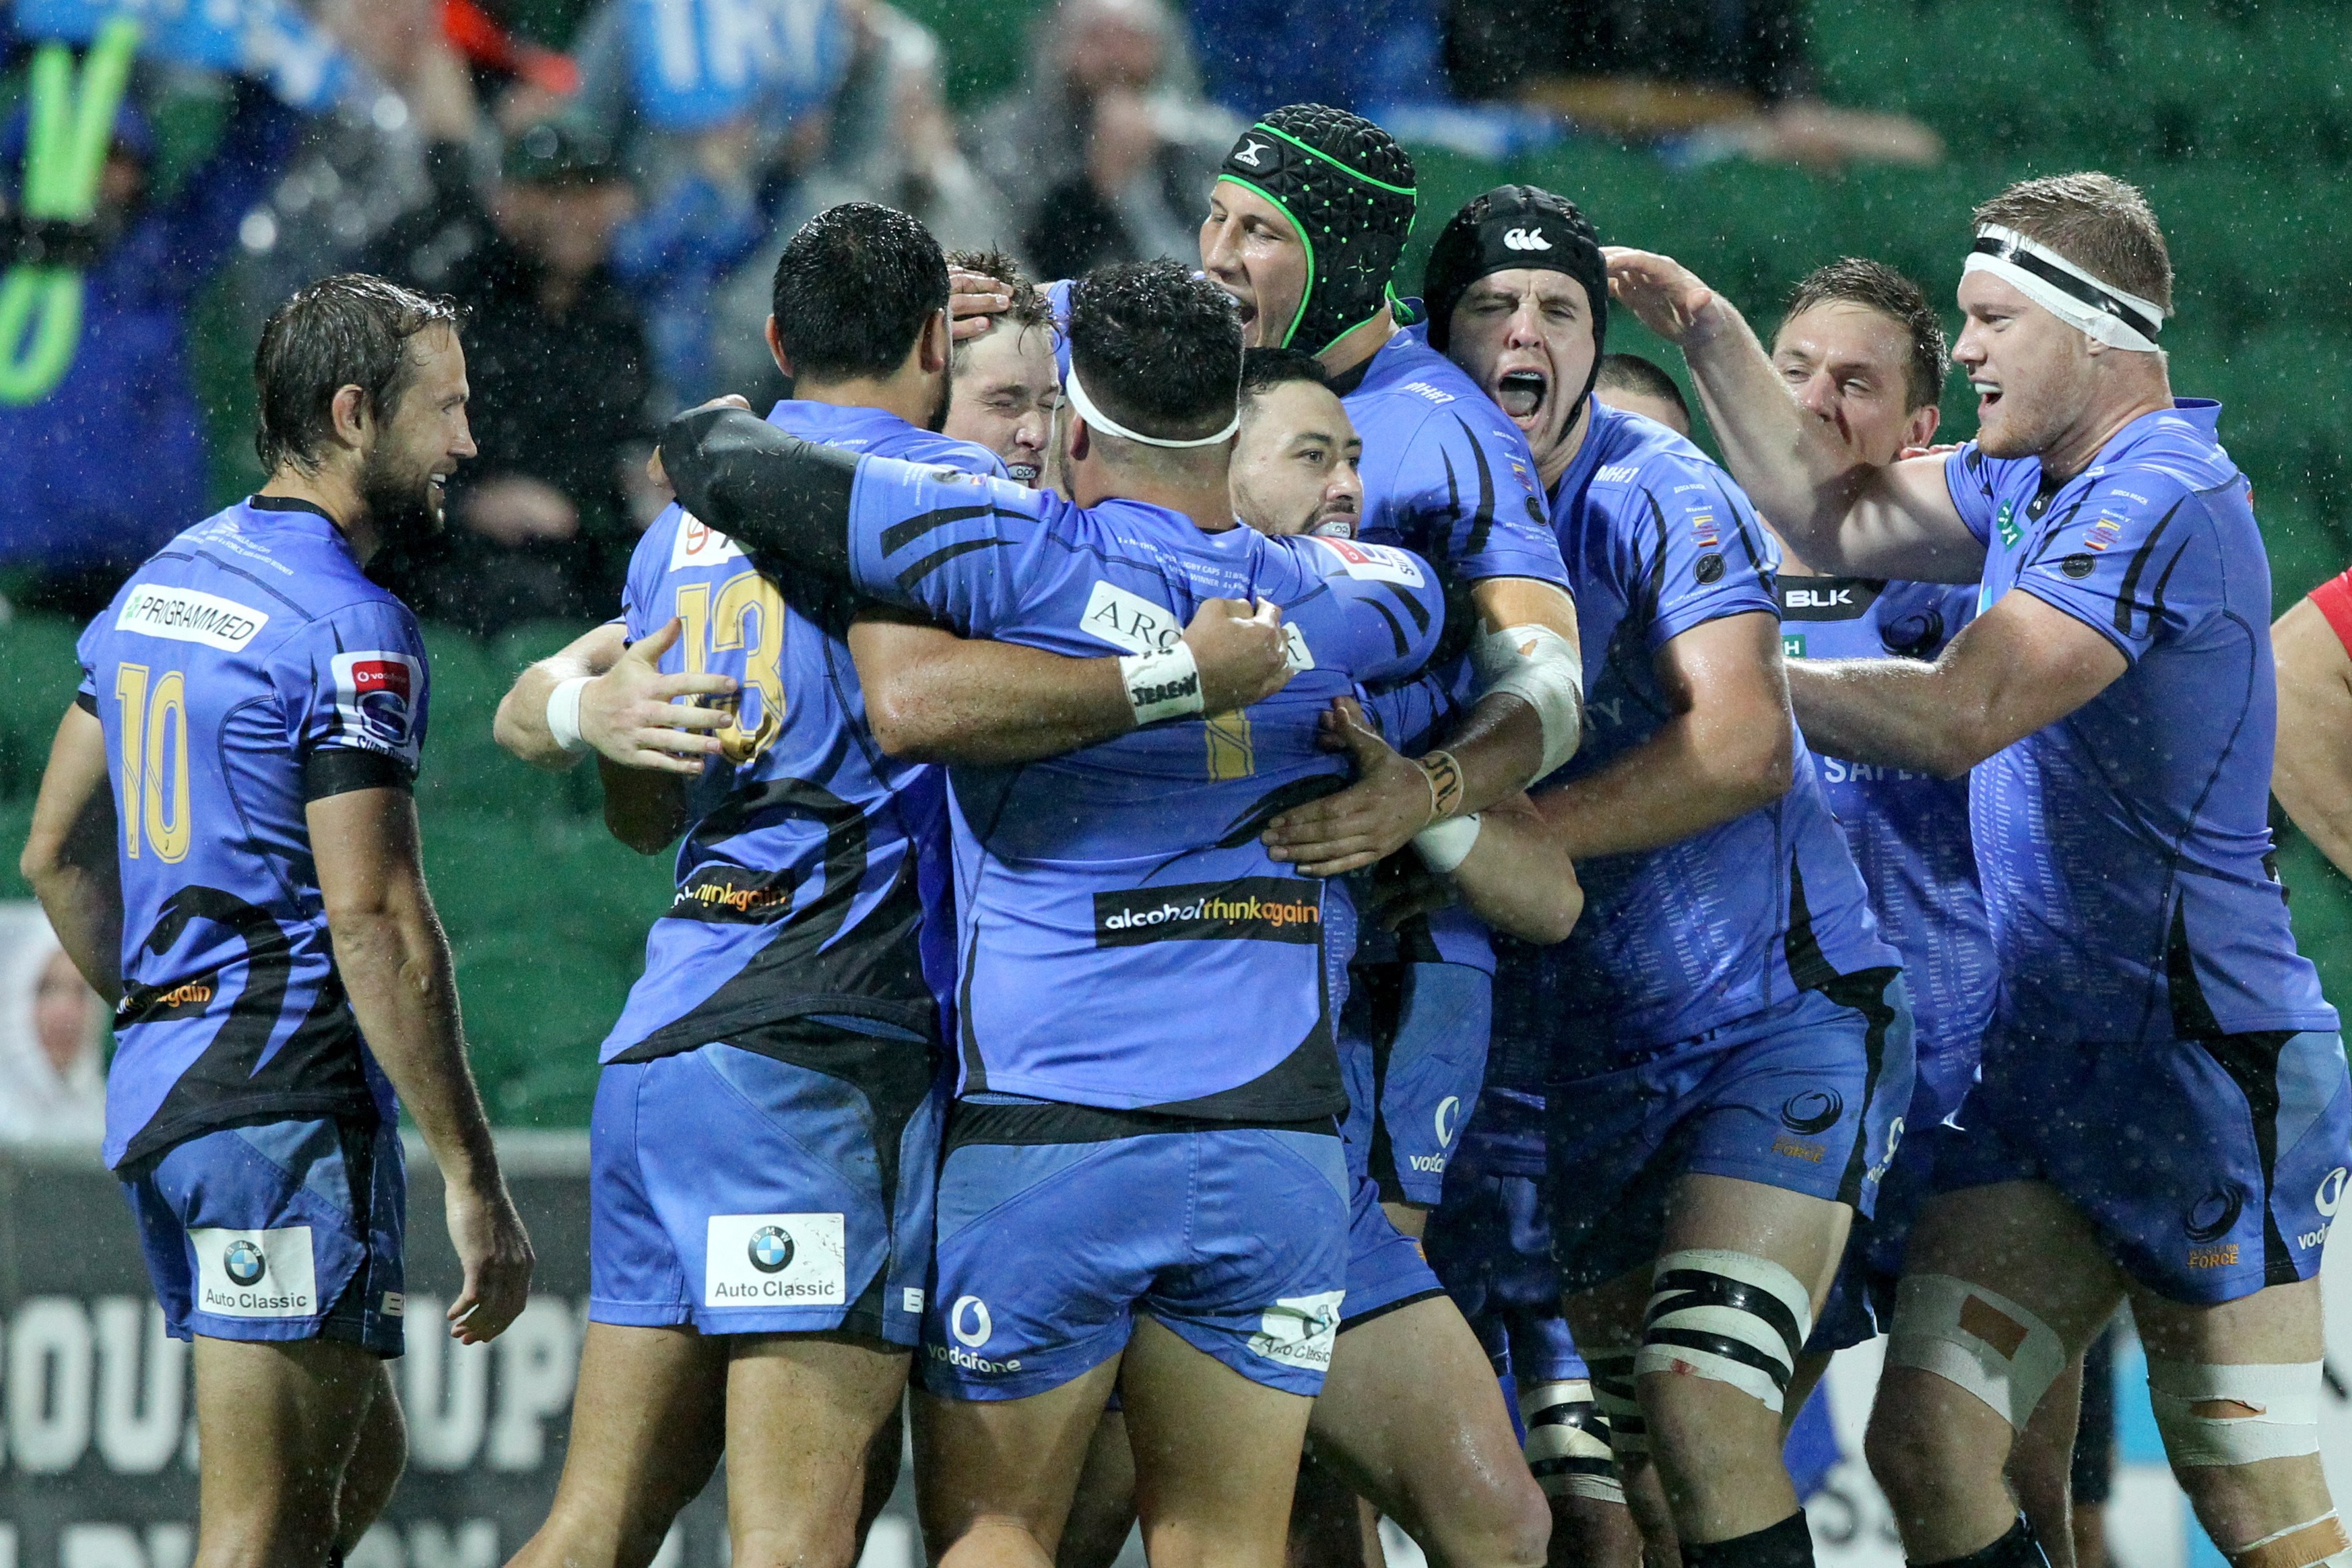 Western Force players celebrate a try. Photo: EPA